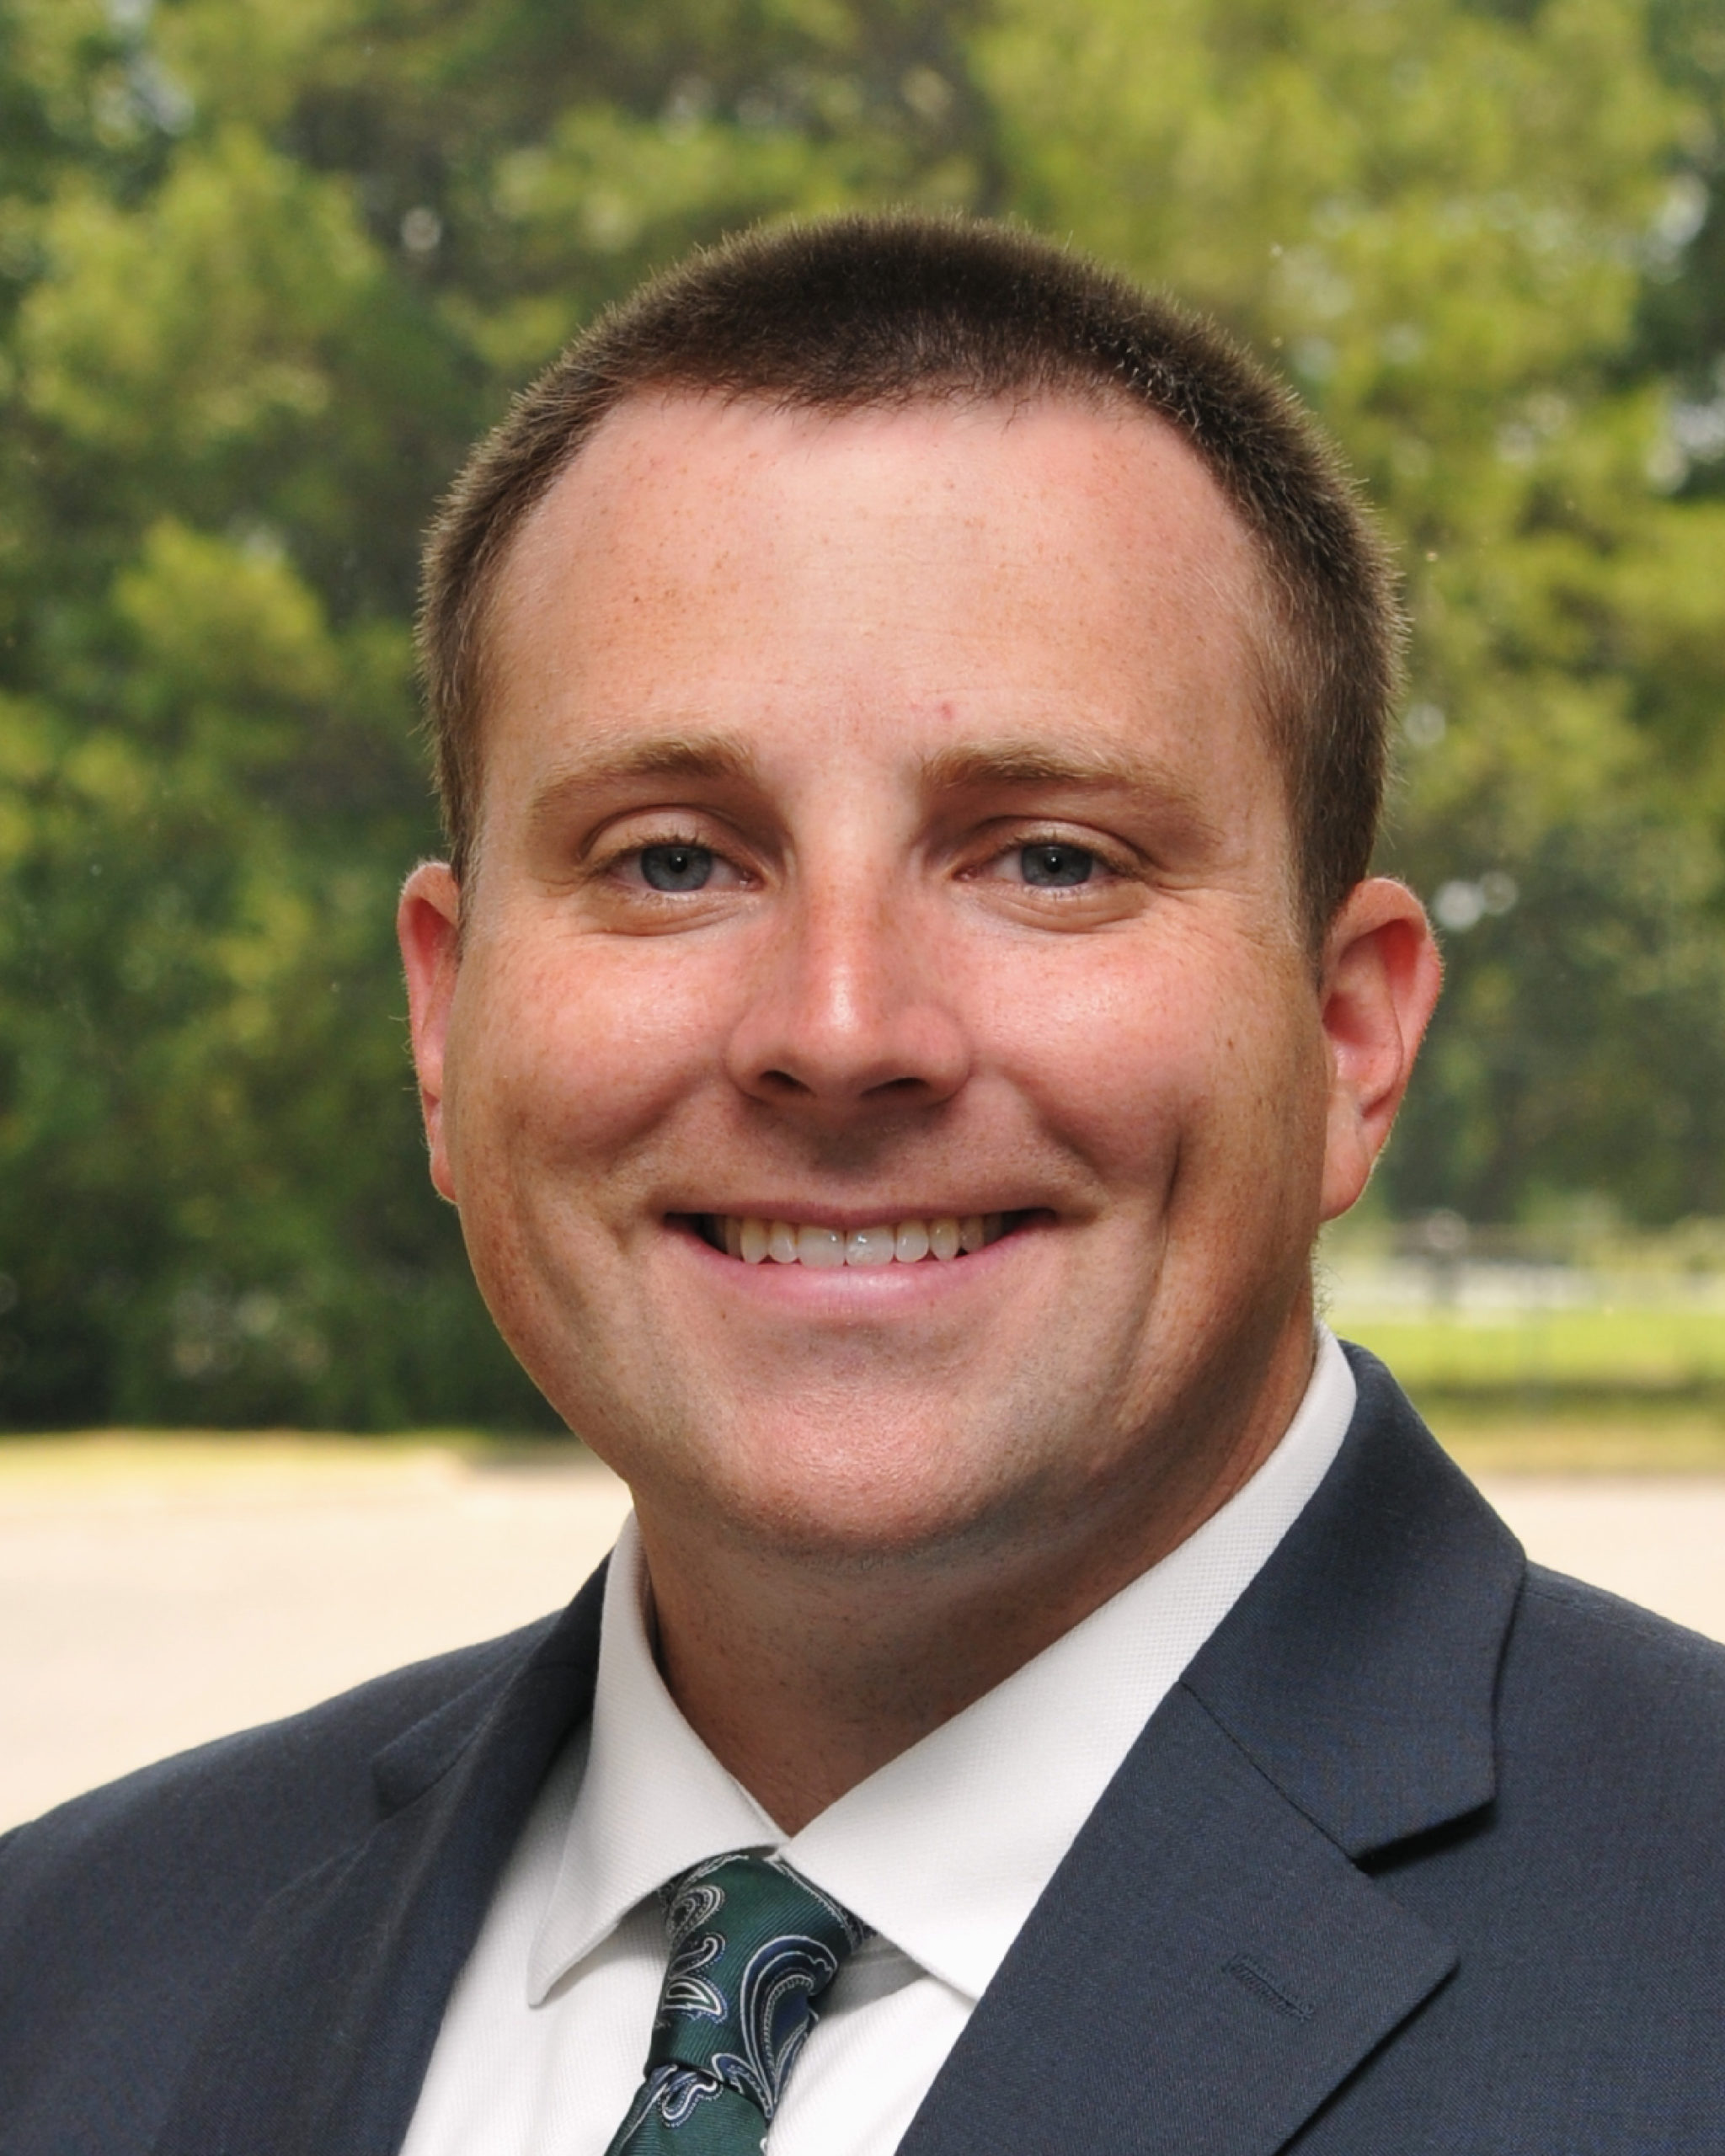 Eric Wells is the chief information officer for Muskogee Public Schools in Oklahoma.